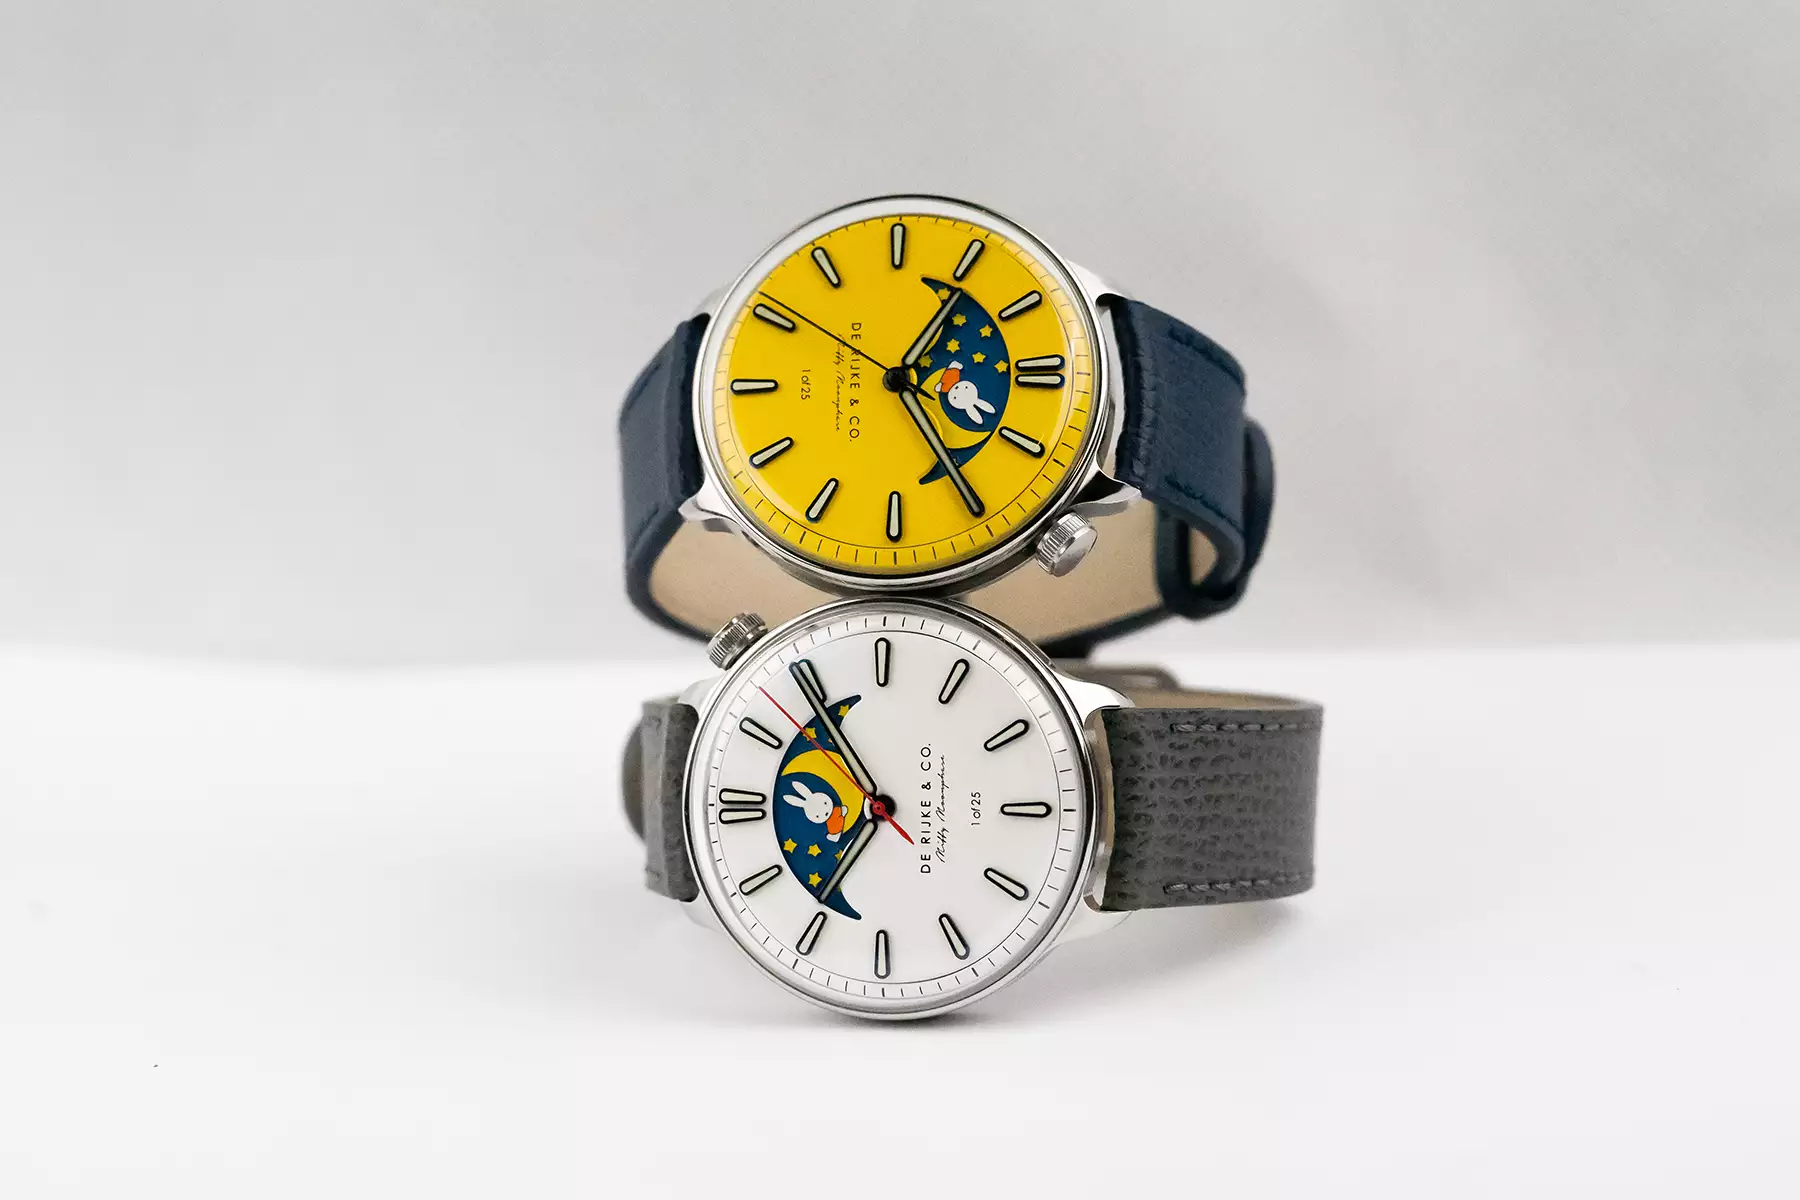 De Rijke Returns to Miffy Collaboration One Year Later with New Dial Colors